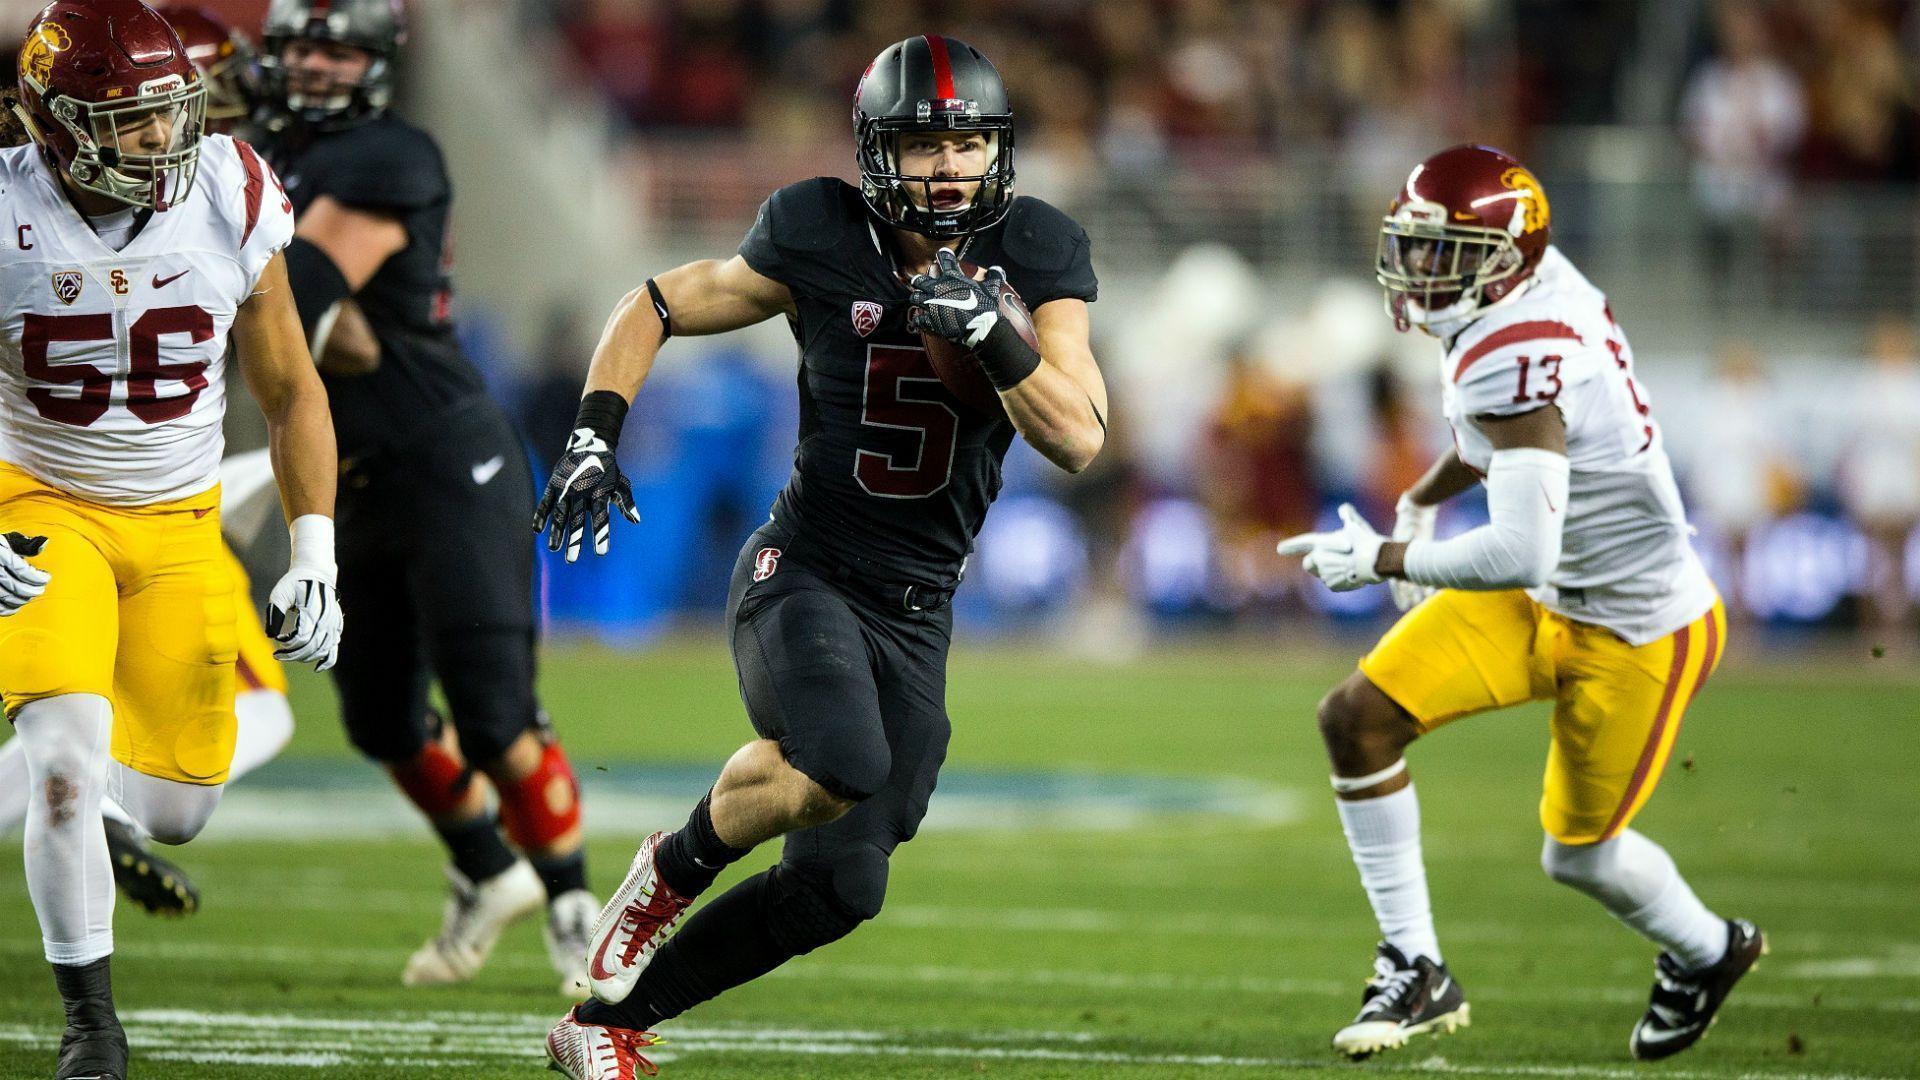 Pac 12 Media Days: Stanford's Christian McCaffrey Says He Can 'do